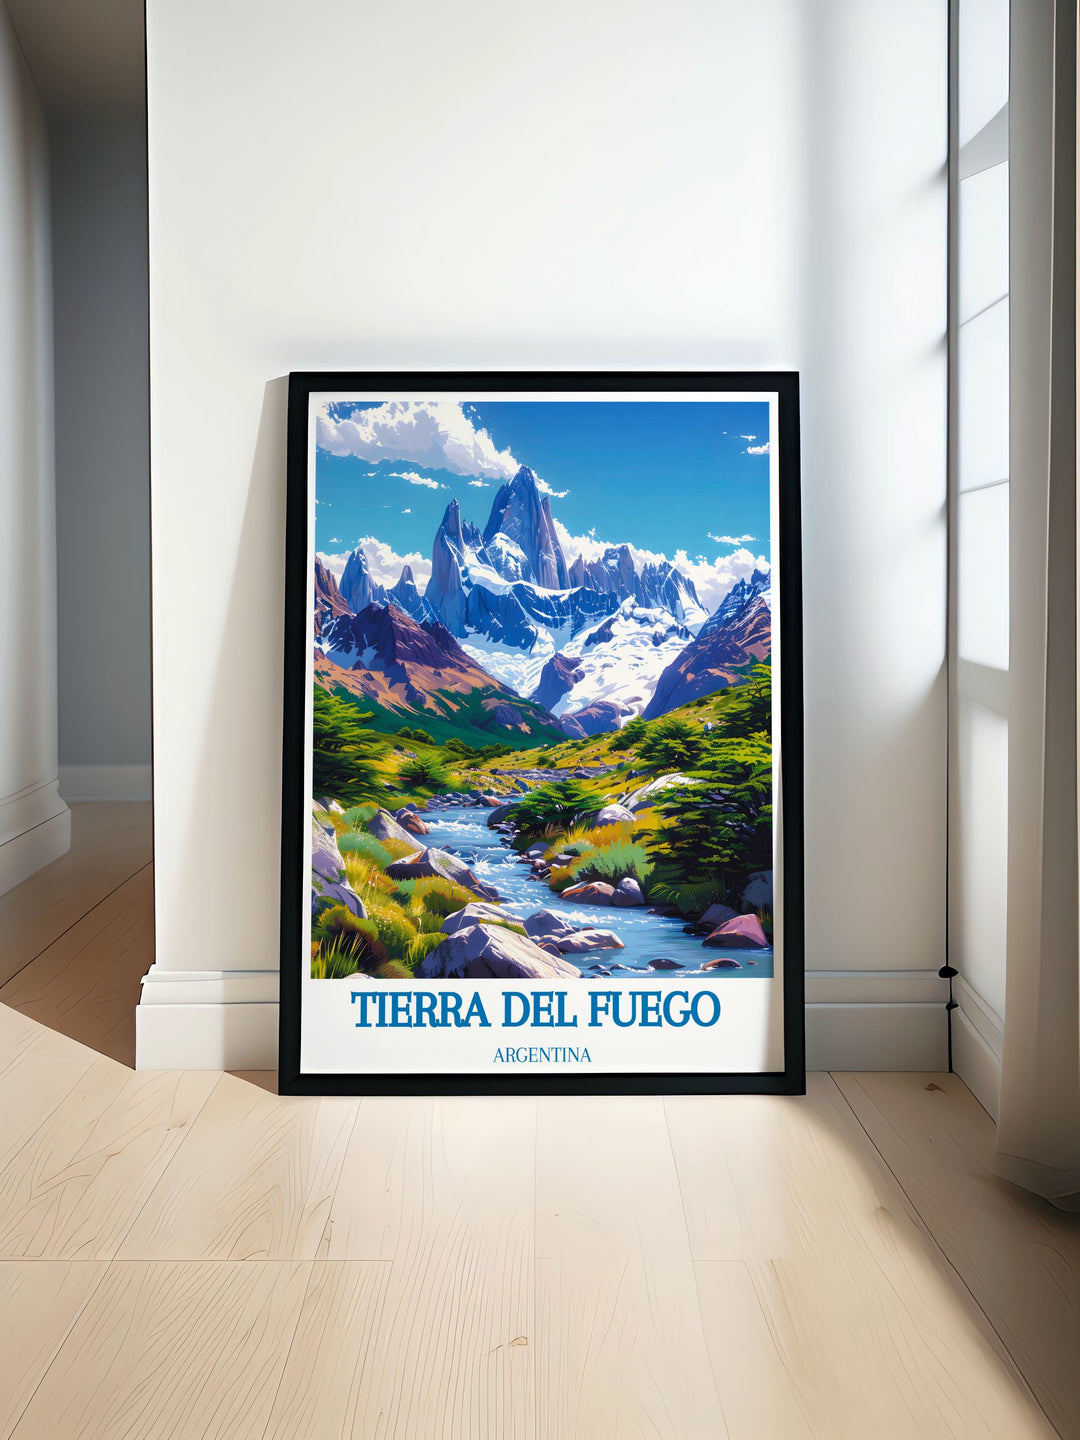 Celebrate the natural beauty of Argentinas national park with this art print, depicting the serene lakes, dense forests, and dramatic mountains of Tierra del Fuego.